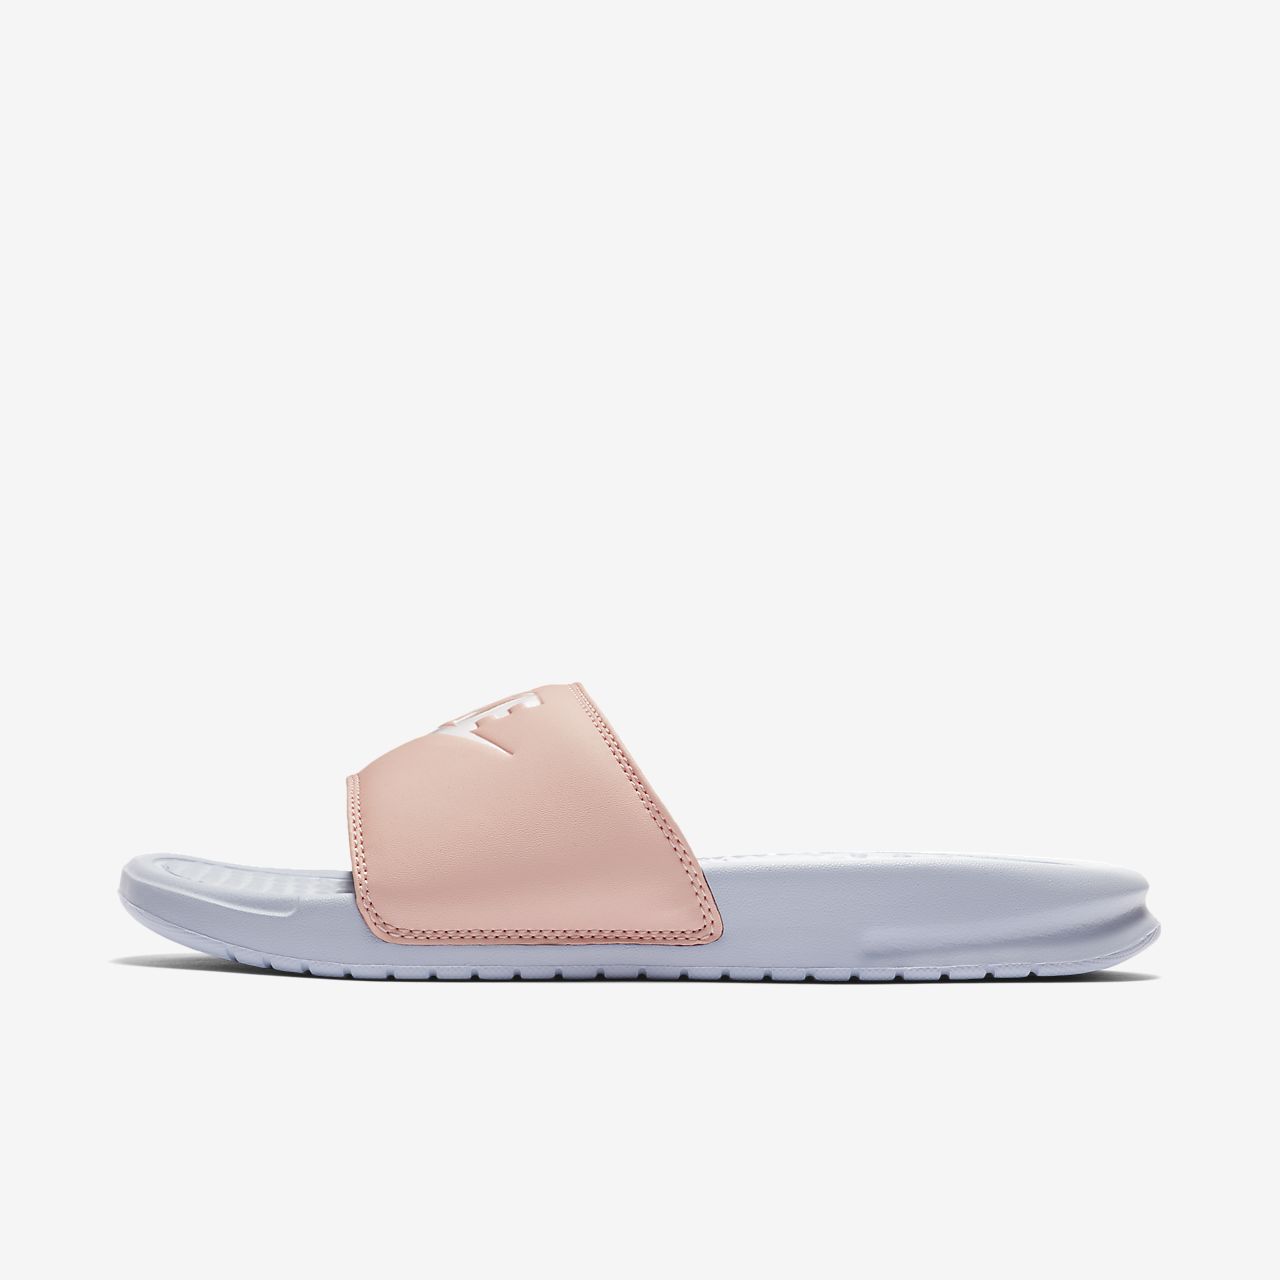 nike two strap slippers